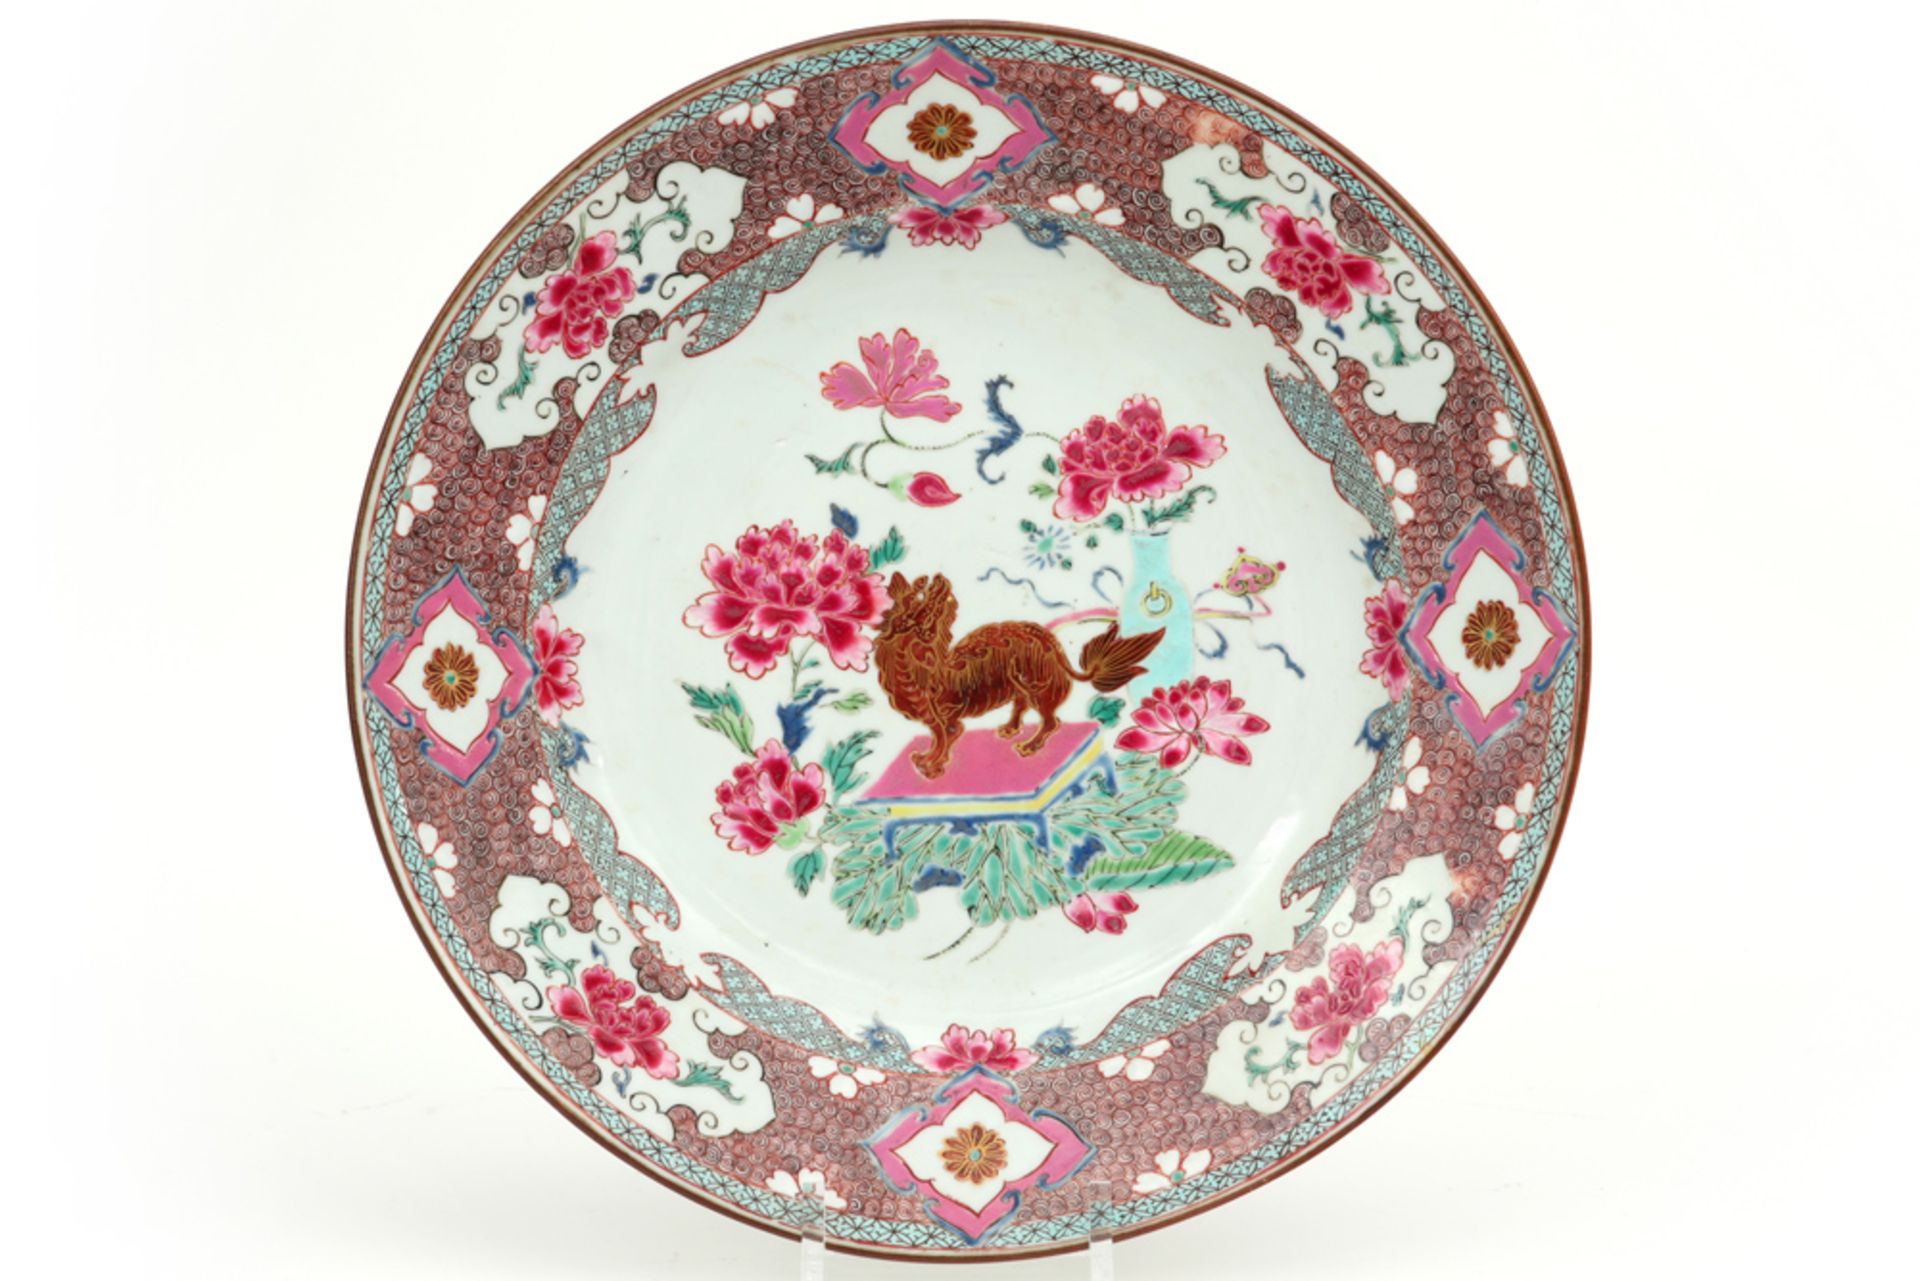 18th Cent. Chinese dish in porcelain with a 'Famille Rose' decor with in the center a cute temple